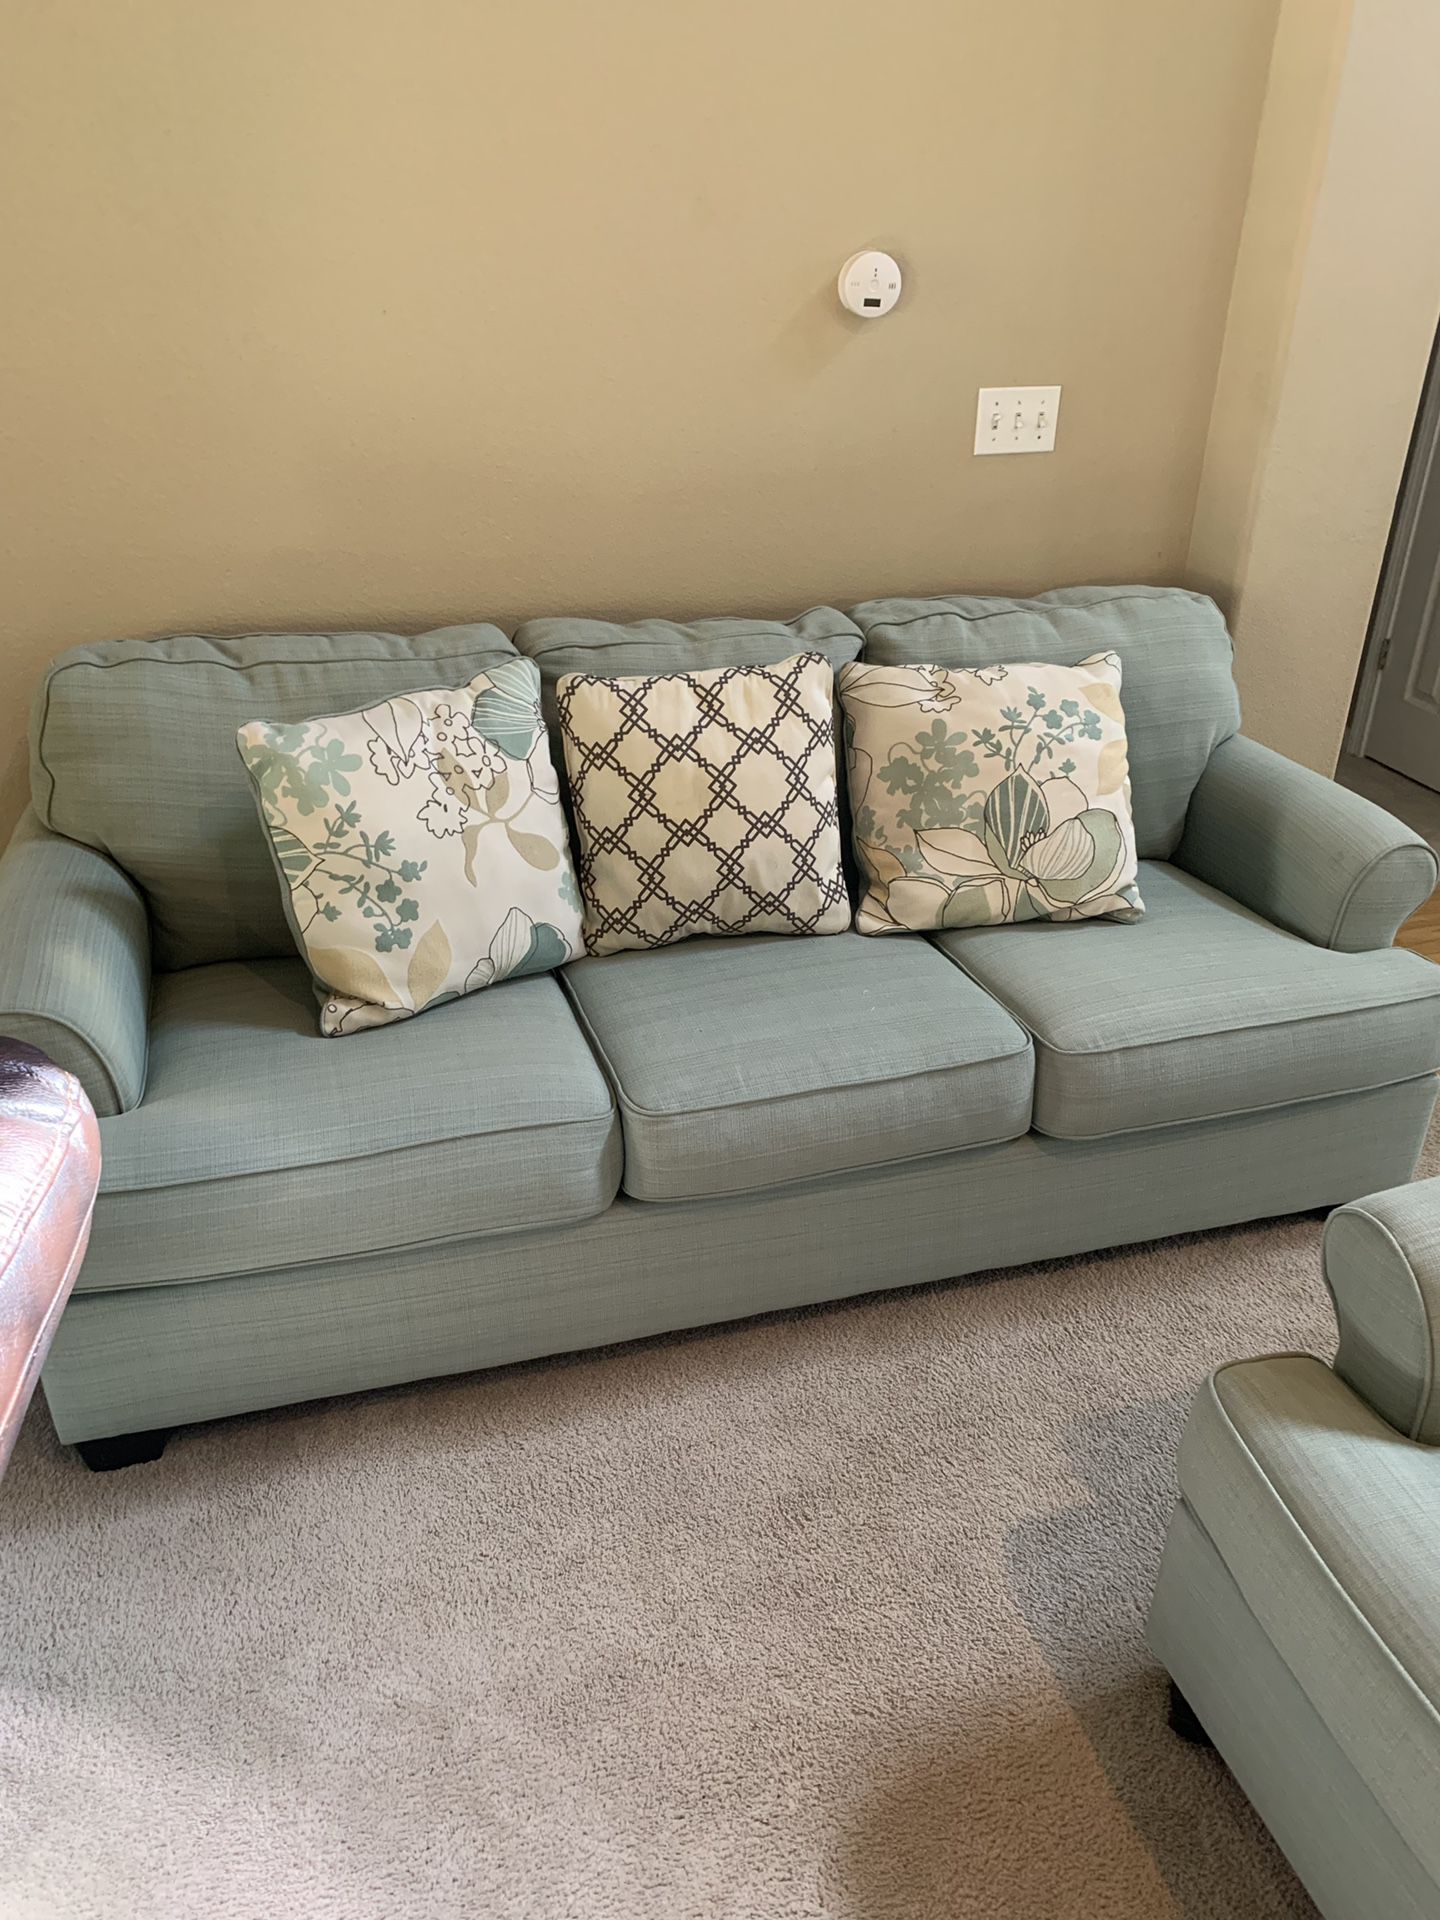 Teal couch set